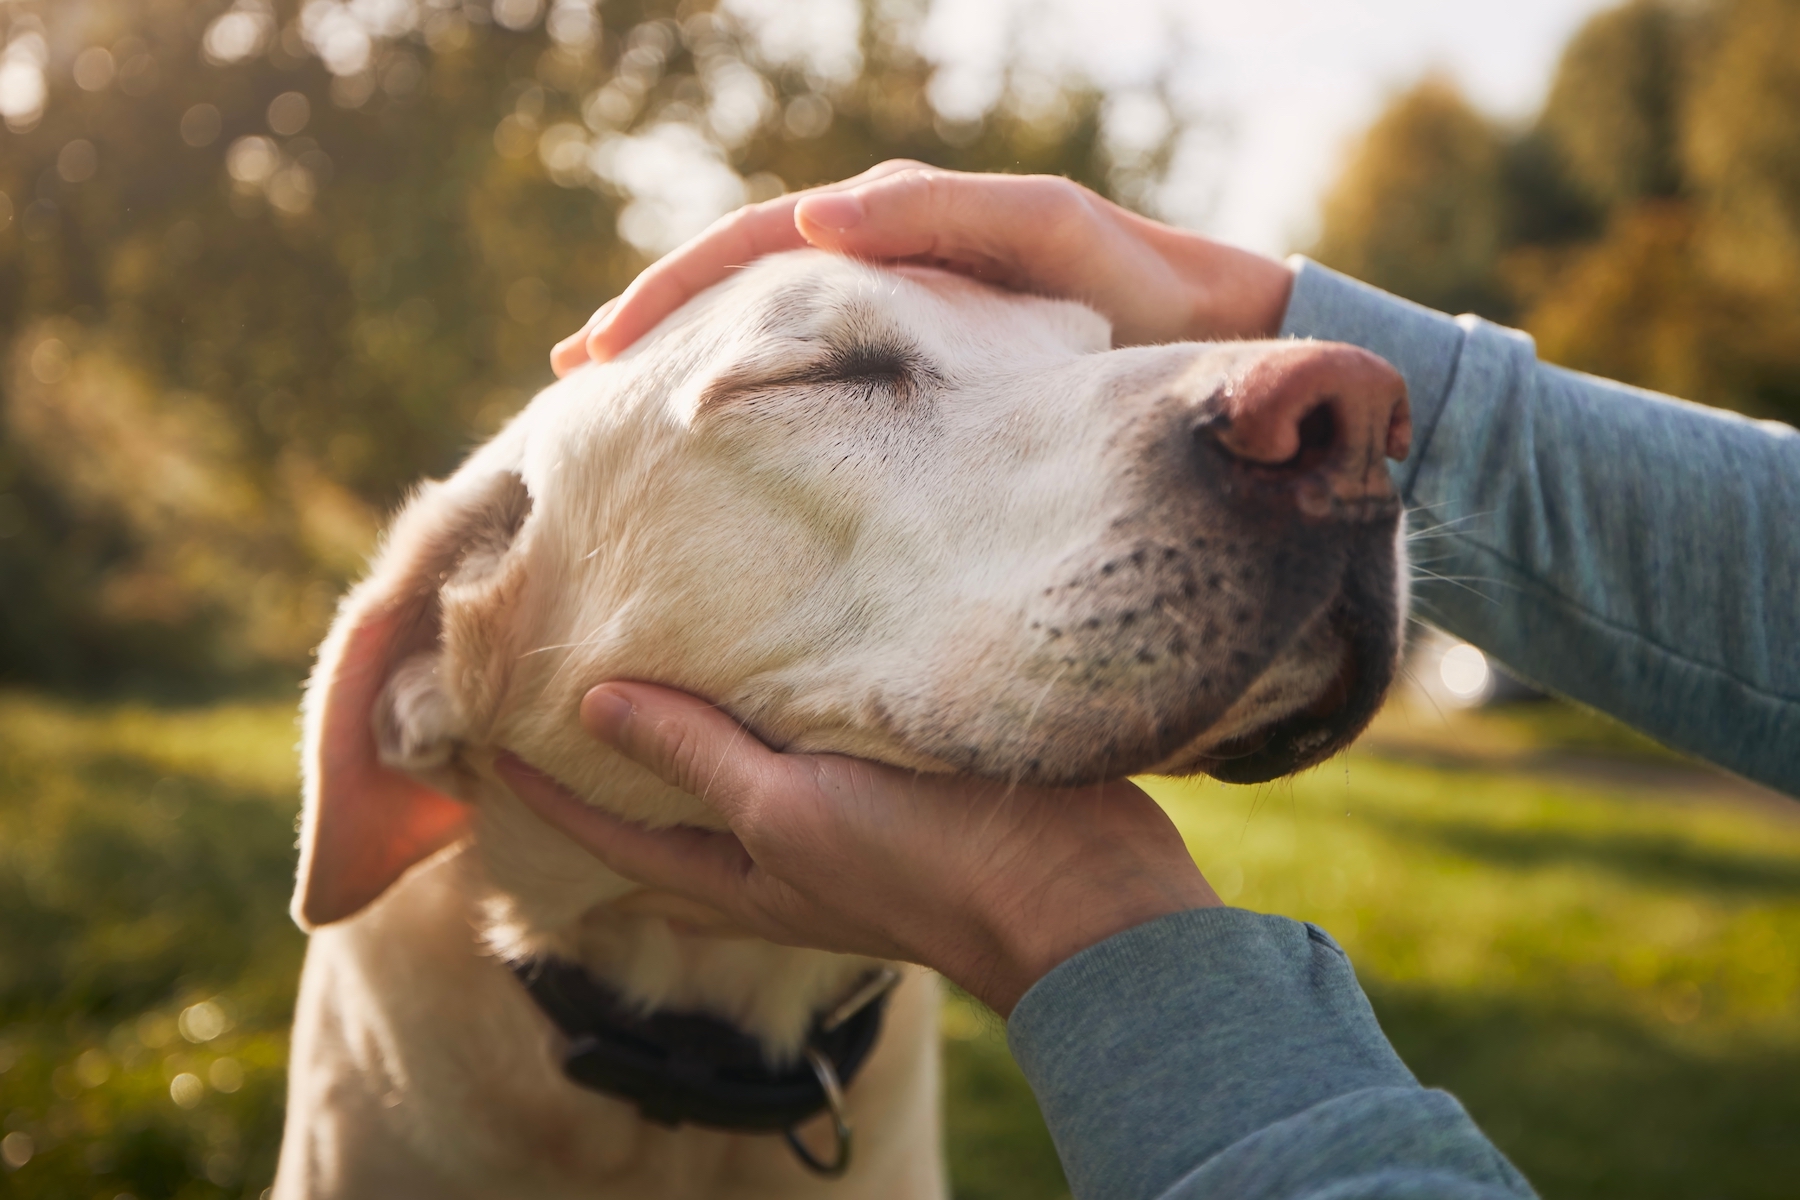 Close-up of a yellow lab's head being held between someone's two hands. The dog's eyes are closed and ears flopped back.